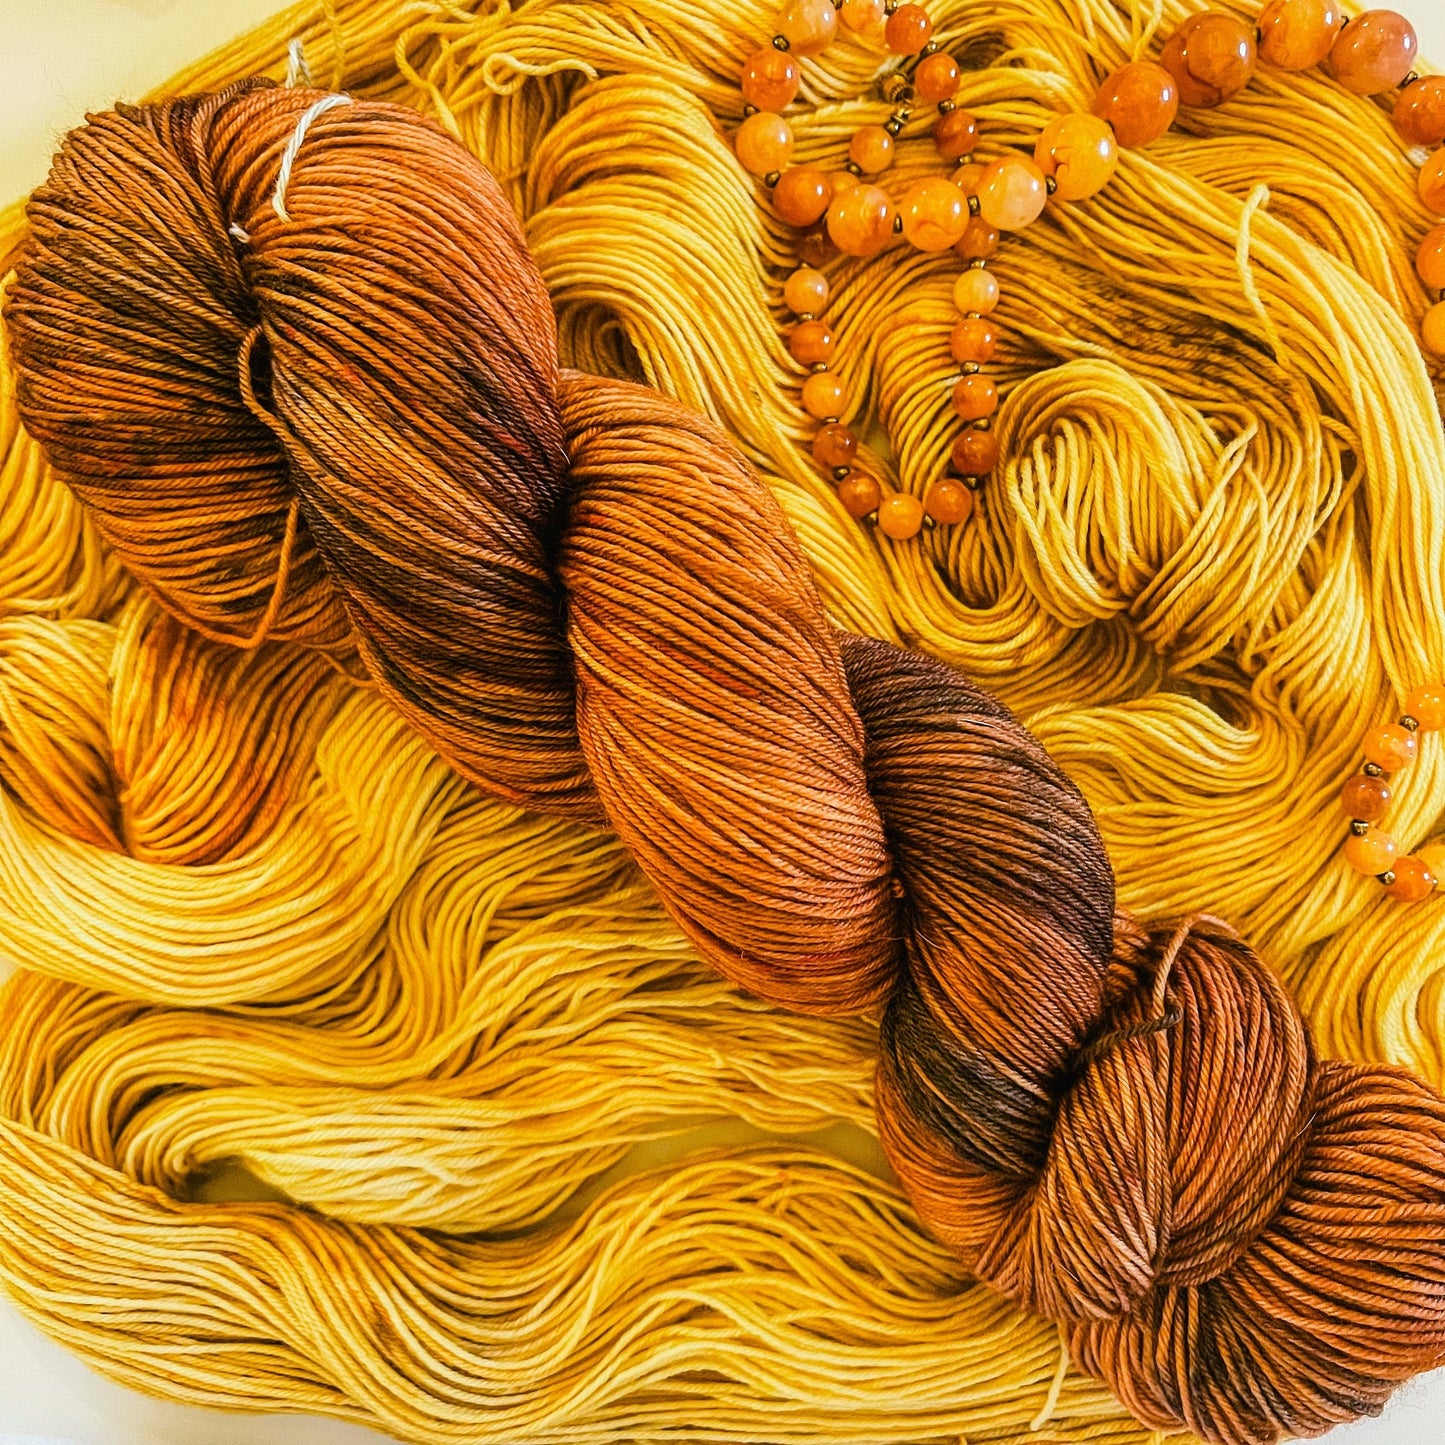 Our Time with its companion black-speckled orange hand-dyed Merino yarn, Chester Copperpot.